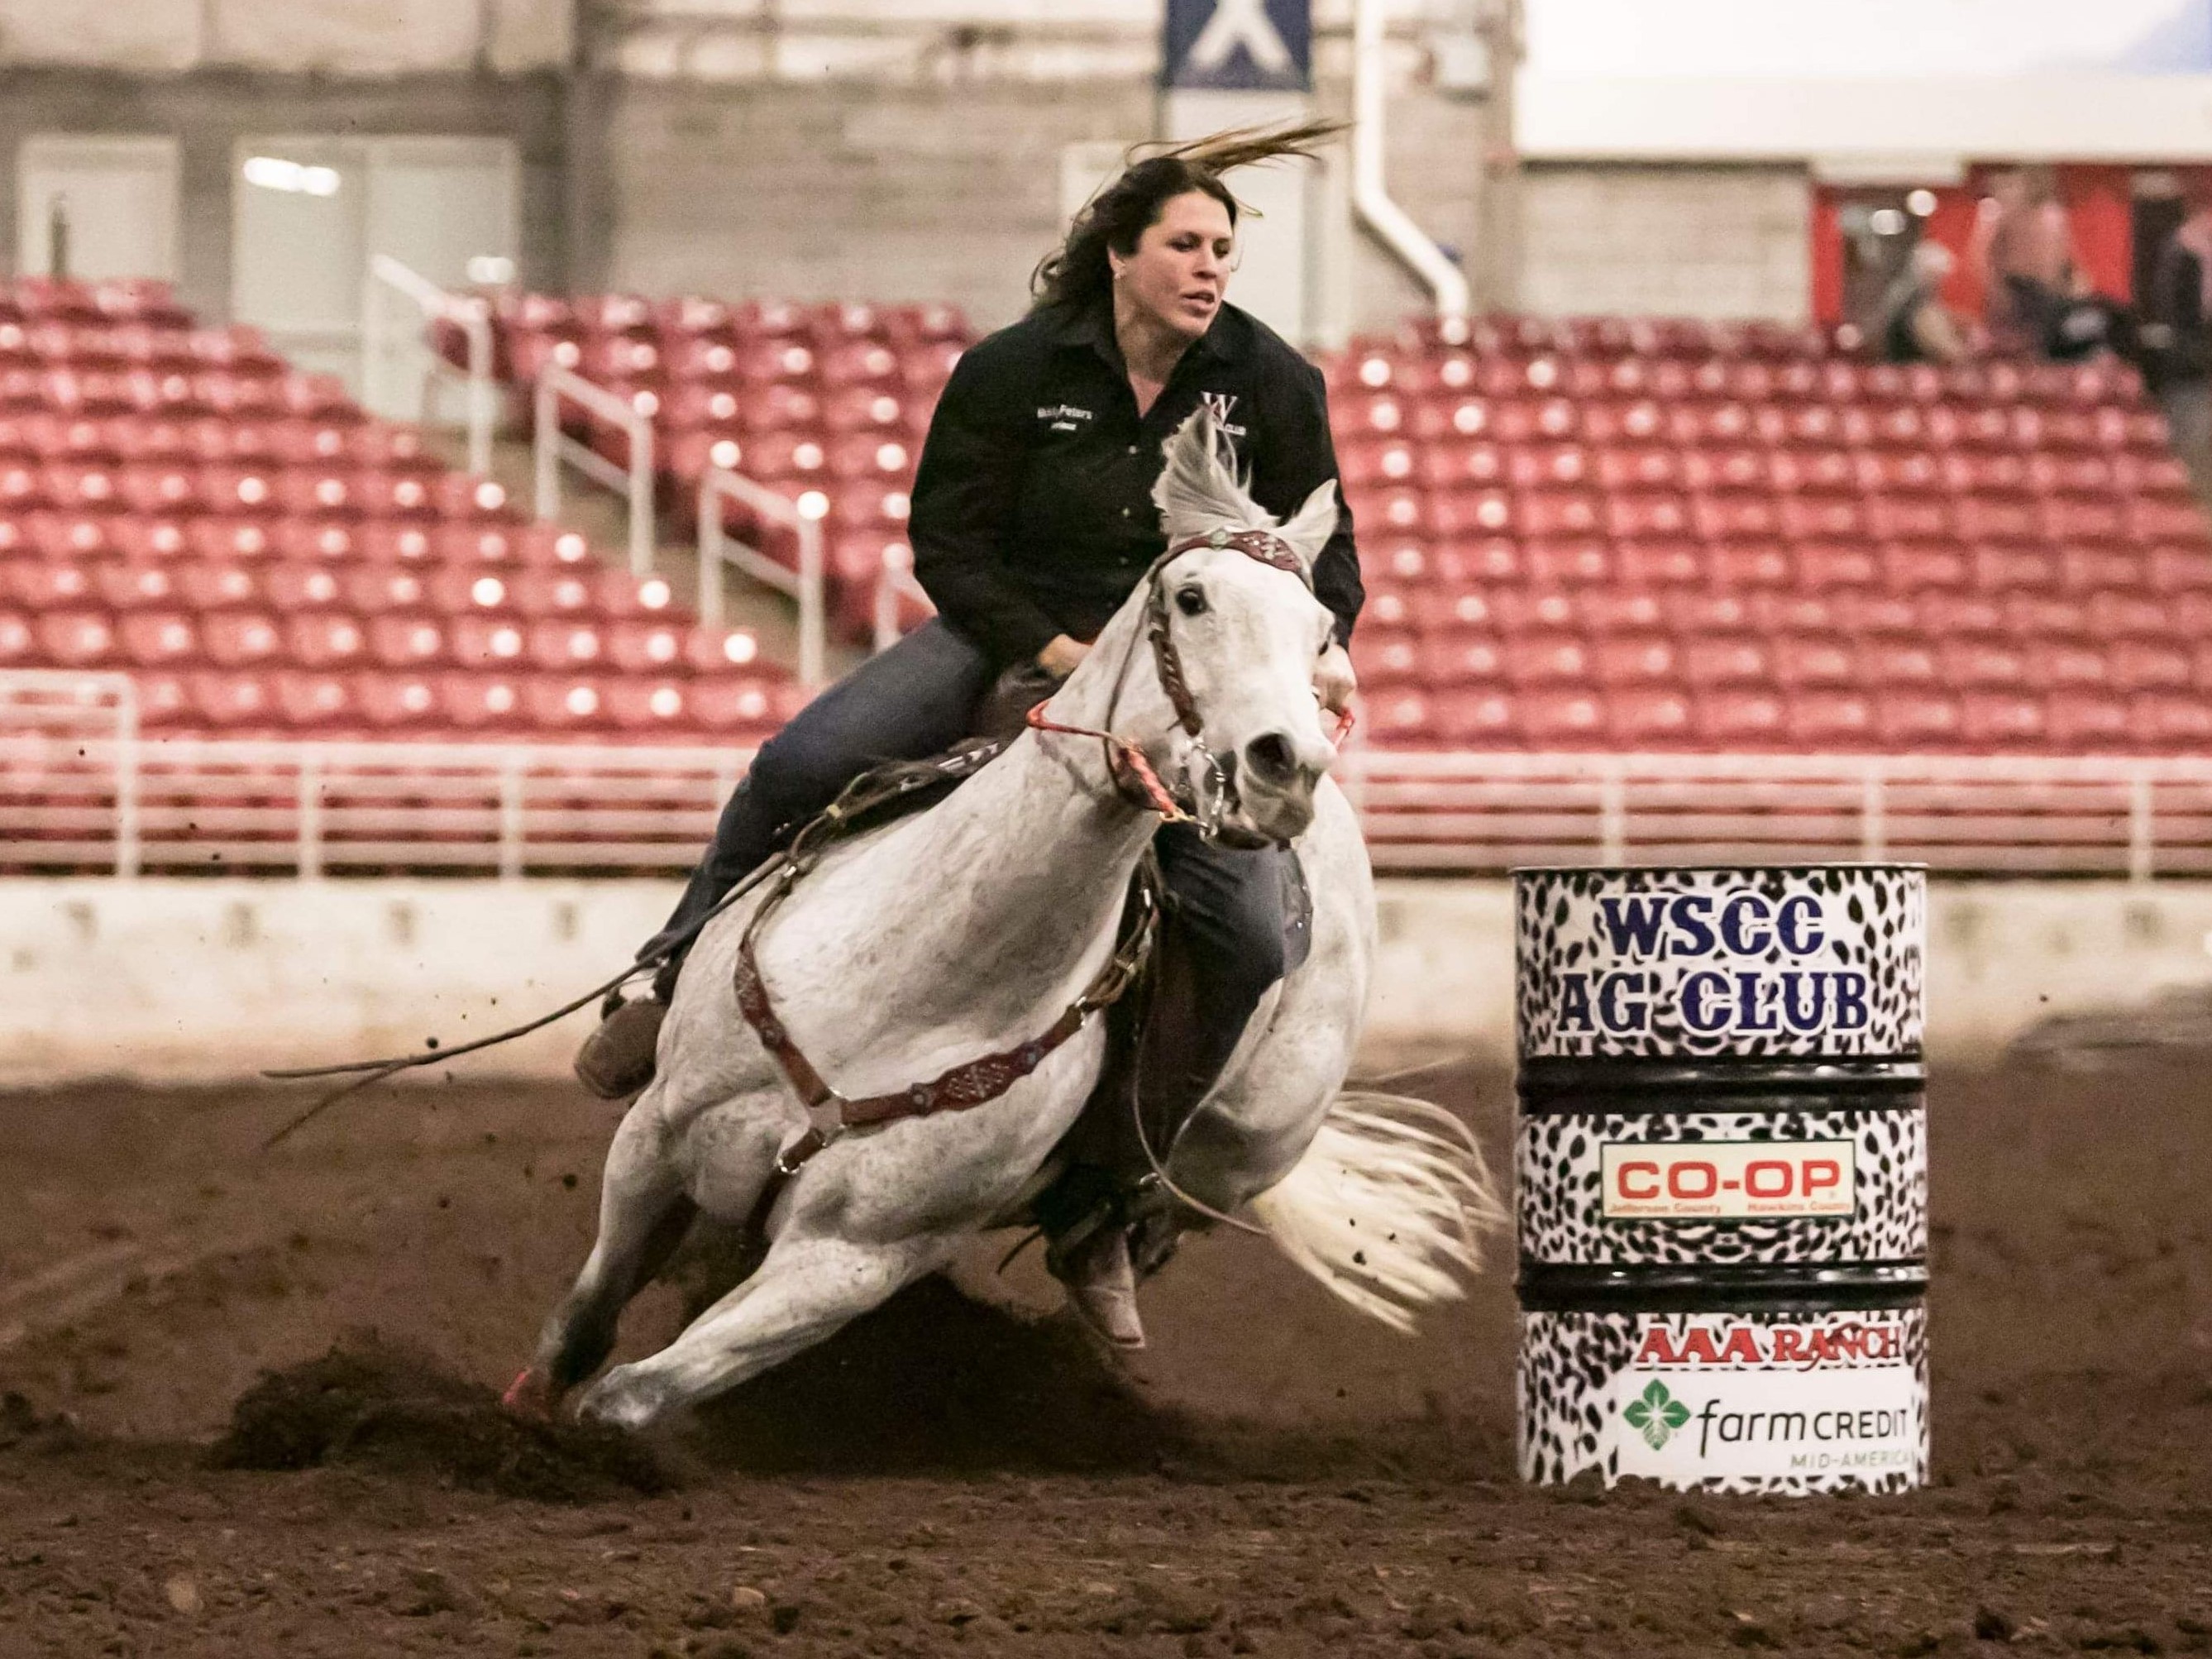  Ranch Rodeo Is Feb. 19 At Expo Center